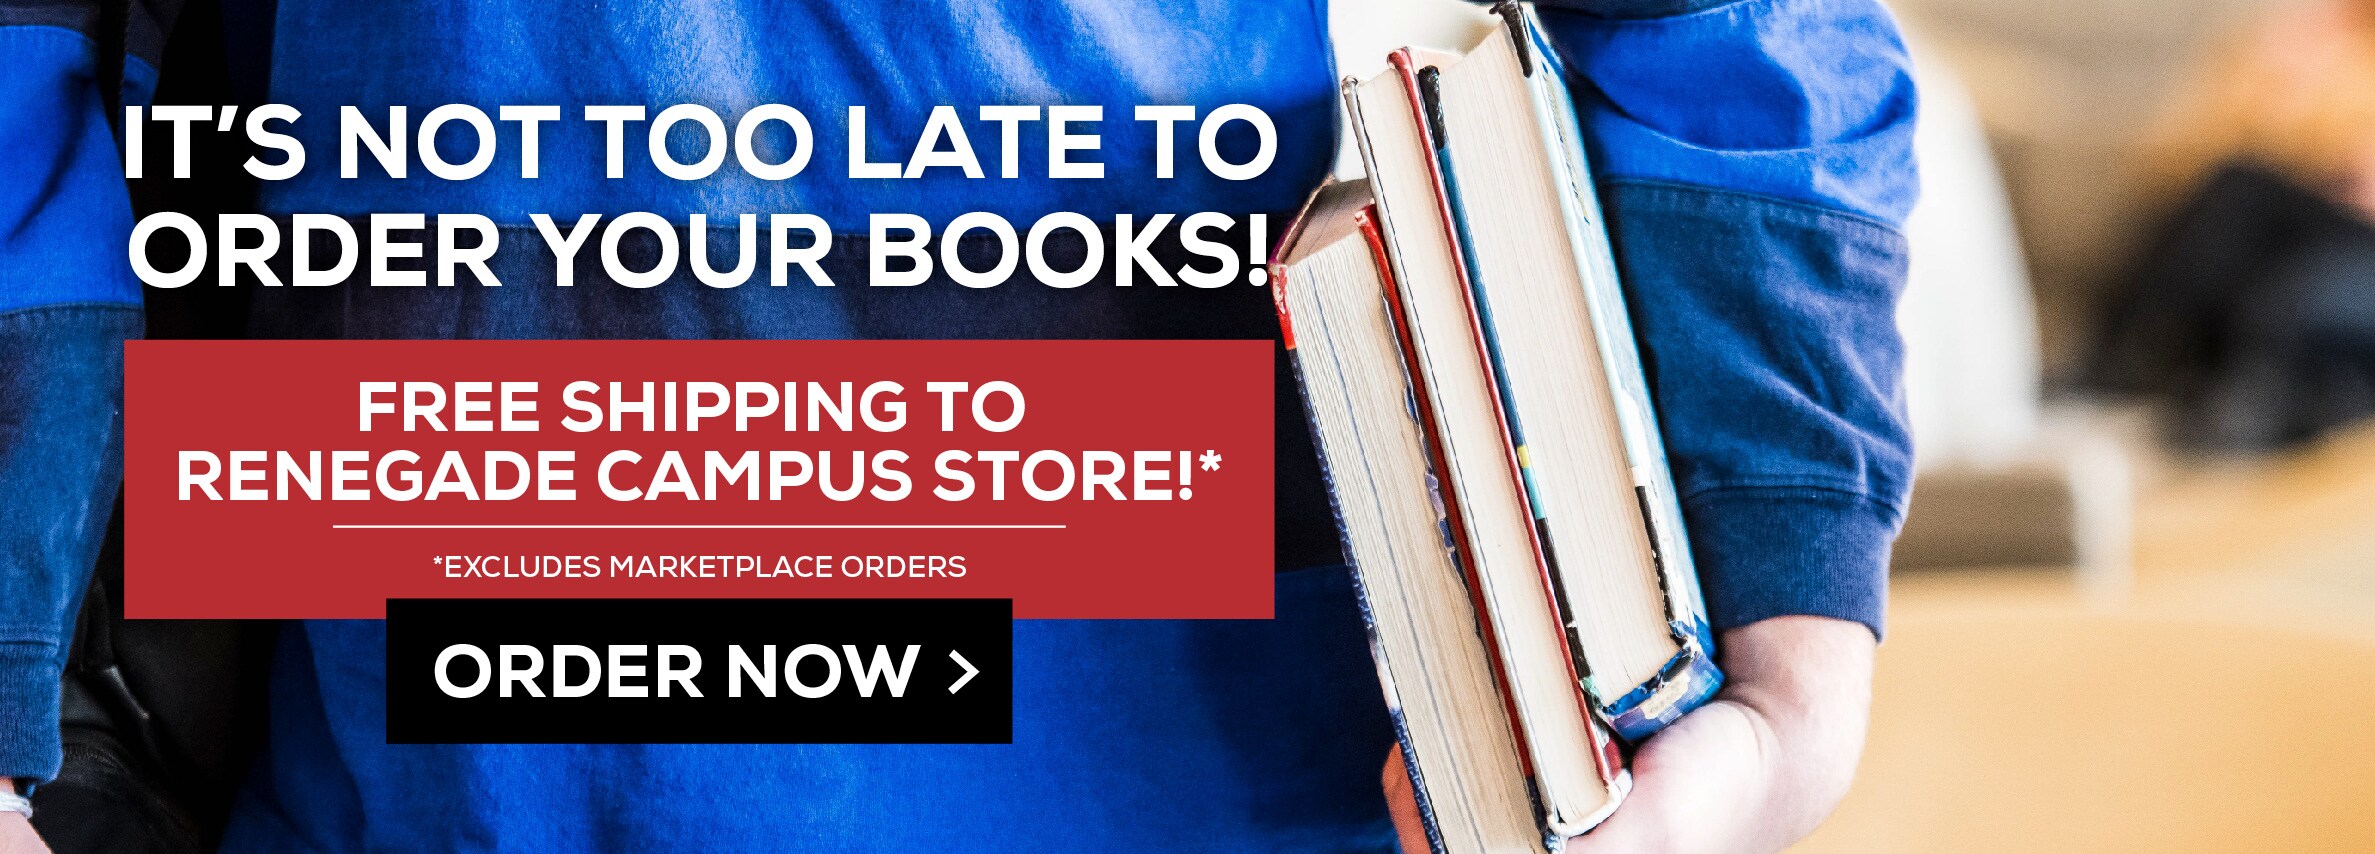 It's Not Too Late To Order Itâ€™s not too late to order your books! Free shipping to renegade campus store!* Excludes marketplace purchases. Order Now. Books! 2023